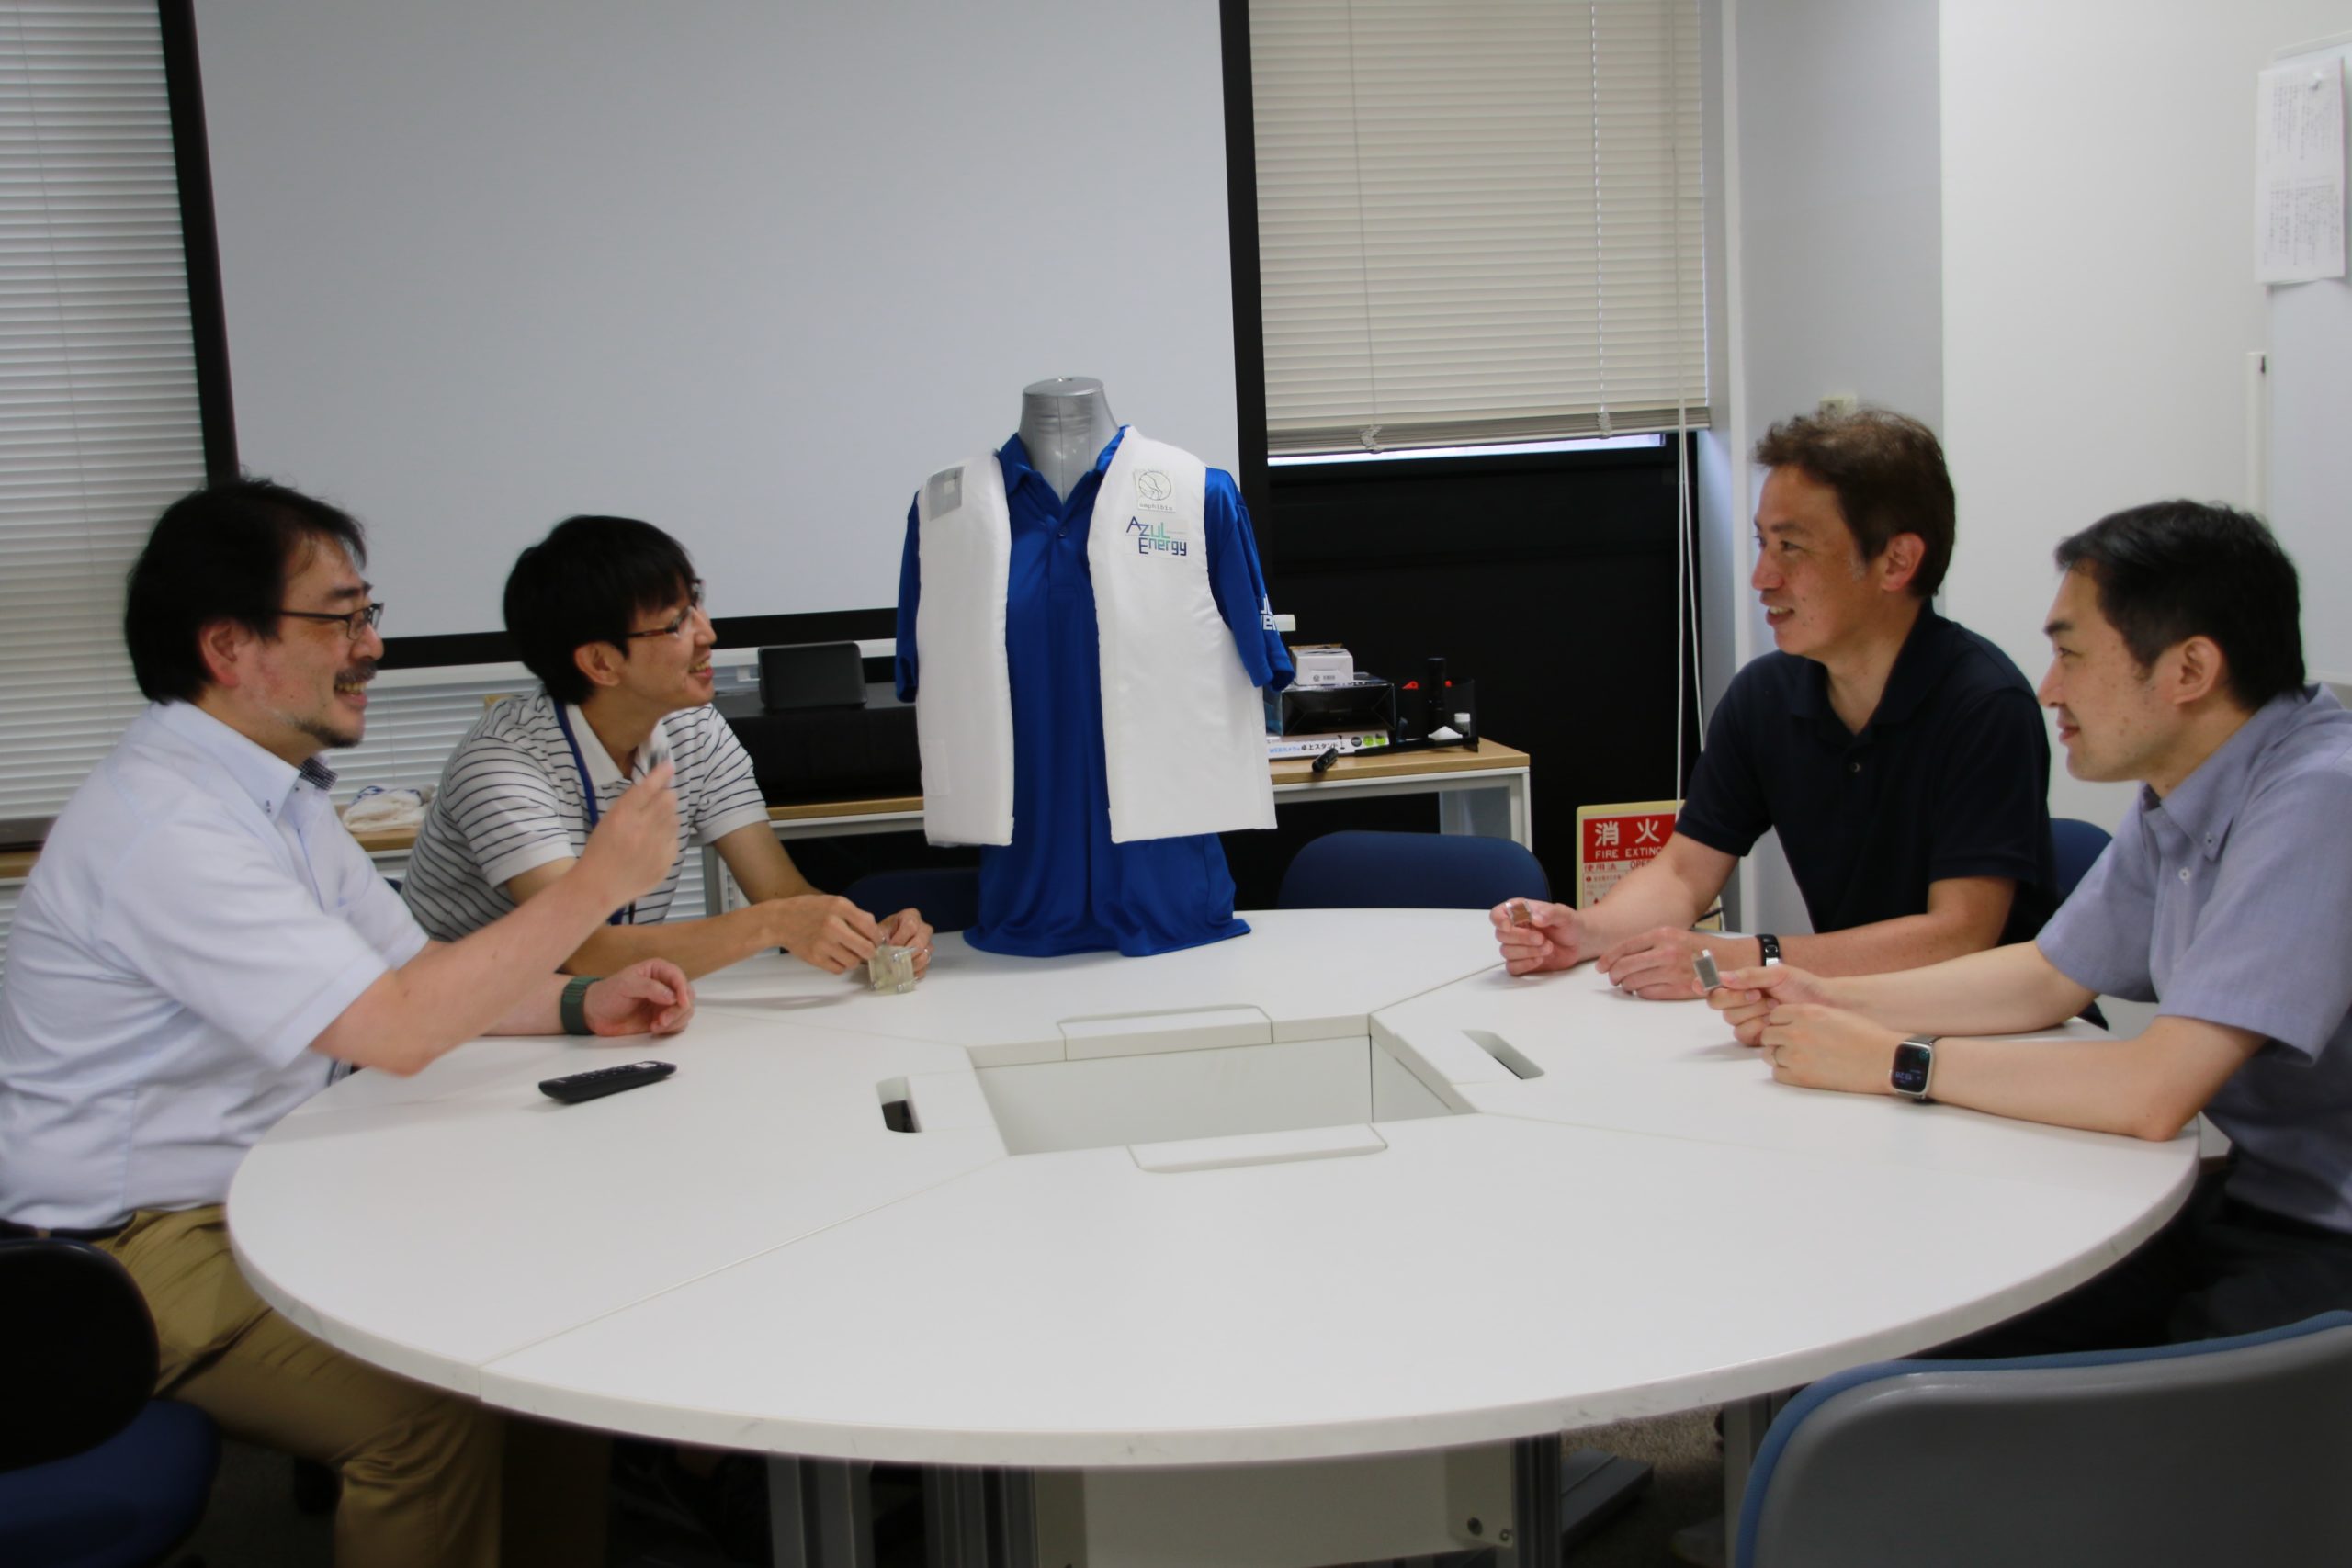 From left to right: Prof. Yabu, Mr. Ishibashi, Prof. Ono, and Mr. Ito discussing application of a metal-air paper battery to a smart life jacket equipped with a GPS sensor.